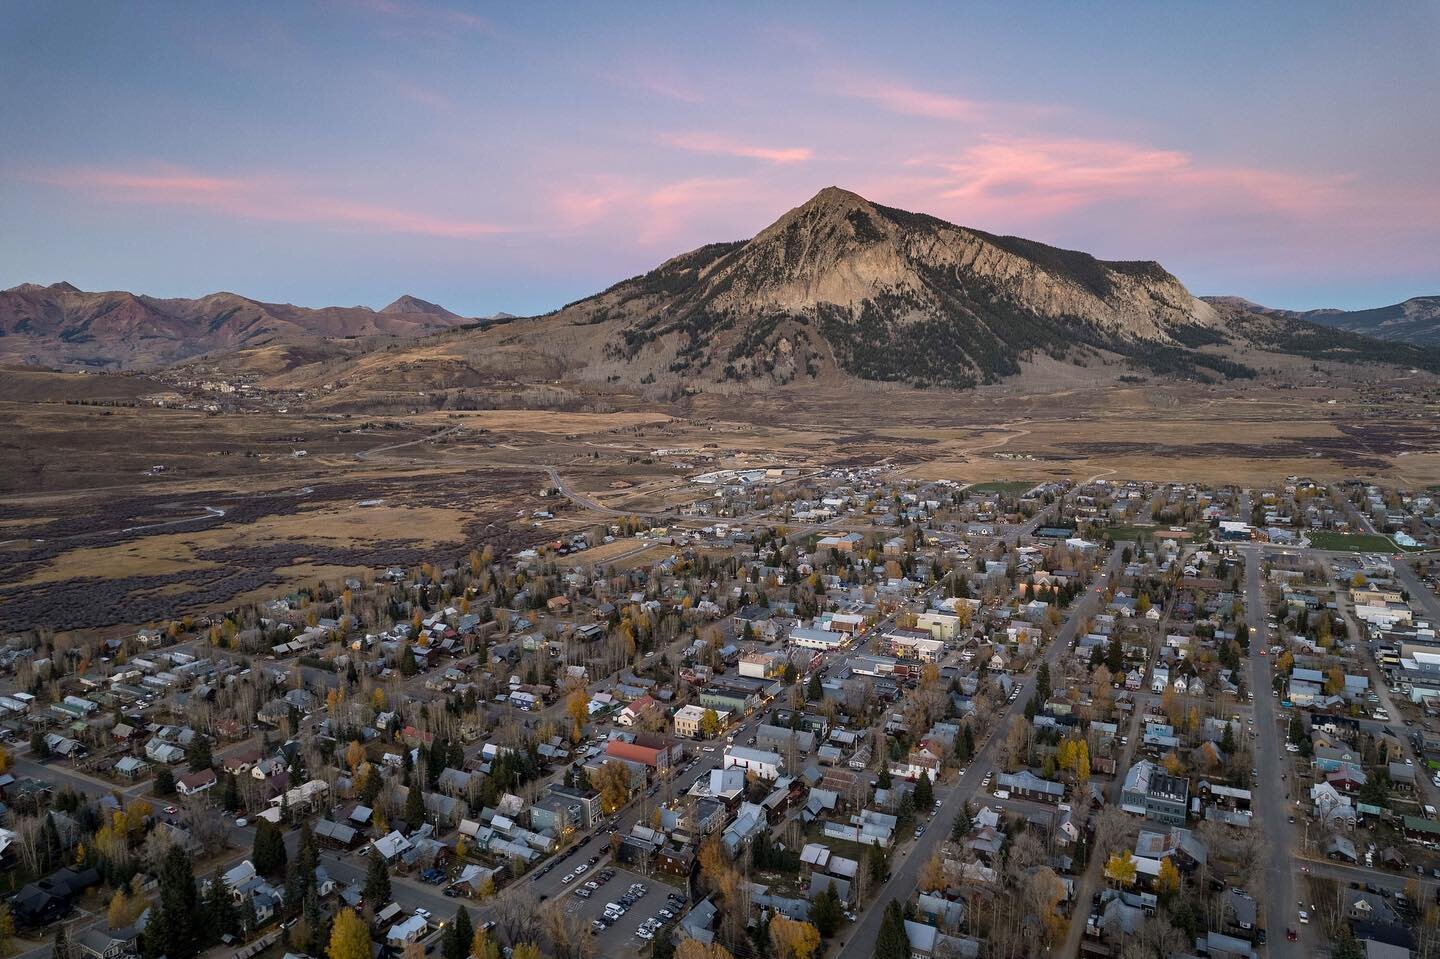 Yesterday evening from above #CrestedButte The aspens are done, but the fishing has been insane! #nomadlife #ontheroad